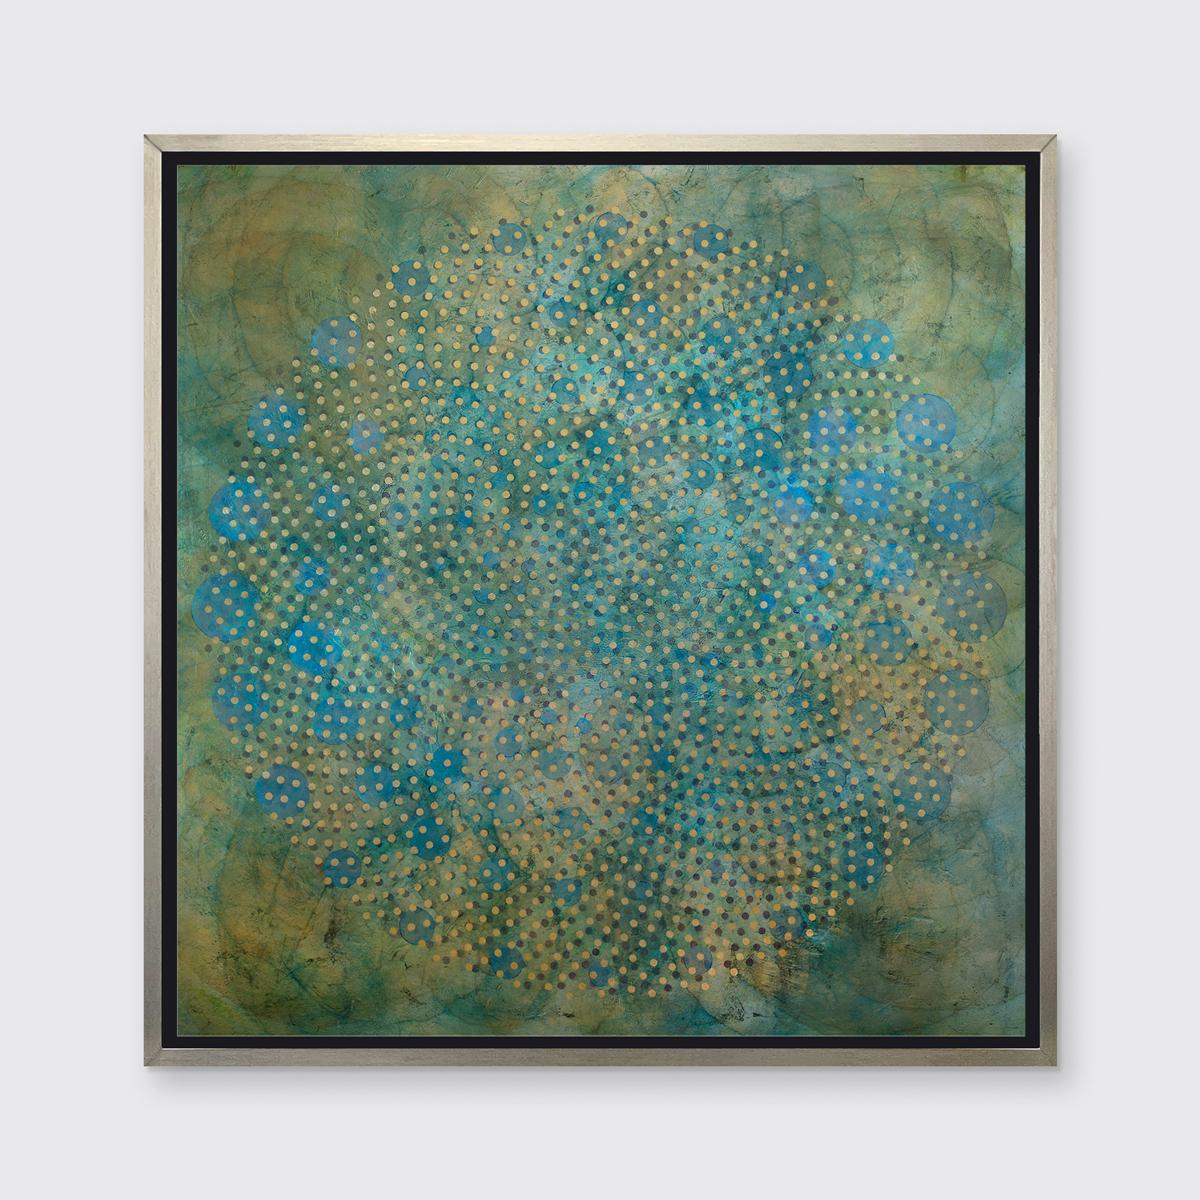 This abstract contemporary limited edition print by Roger Mudre features a cool-toned palette with subtle gold accents. Concentric circles of varying sizes overlap one another to create a larger circle shape at the center of the composition.

This